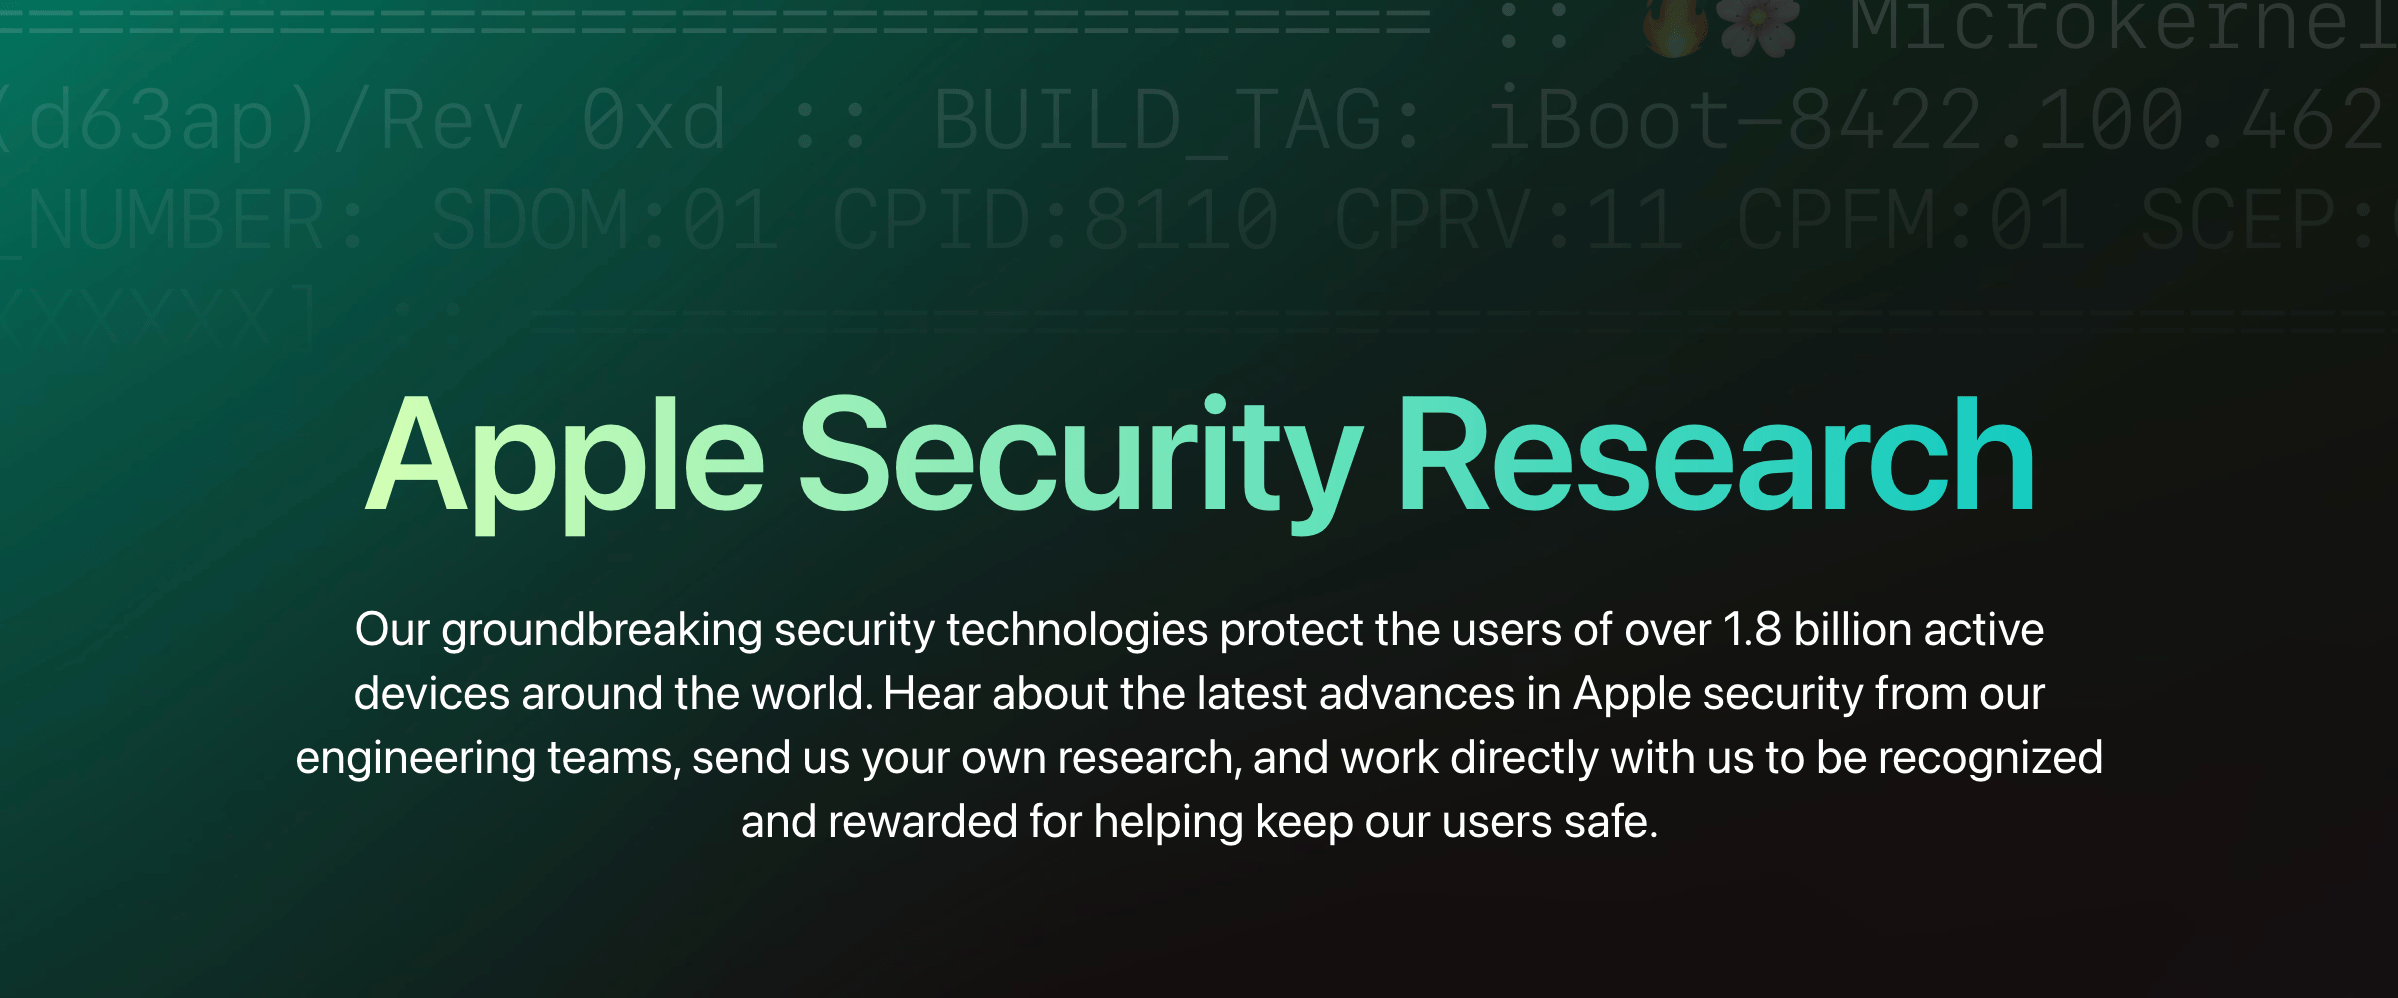 Apple now trying to make security research more approachable with new website